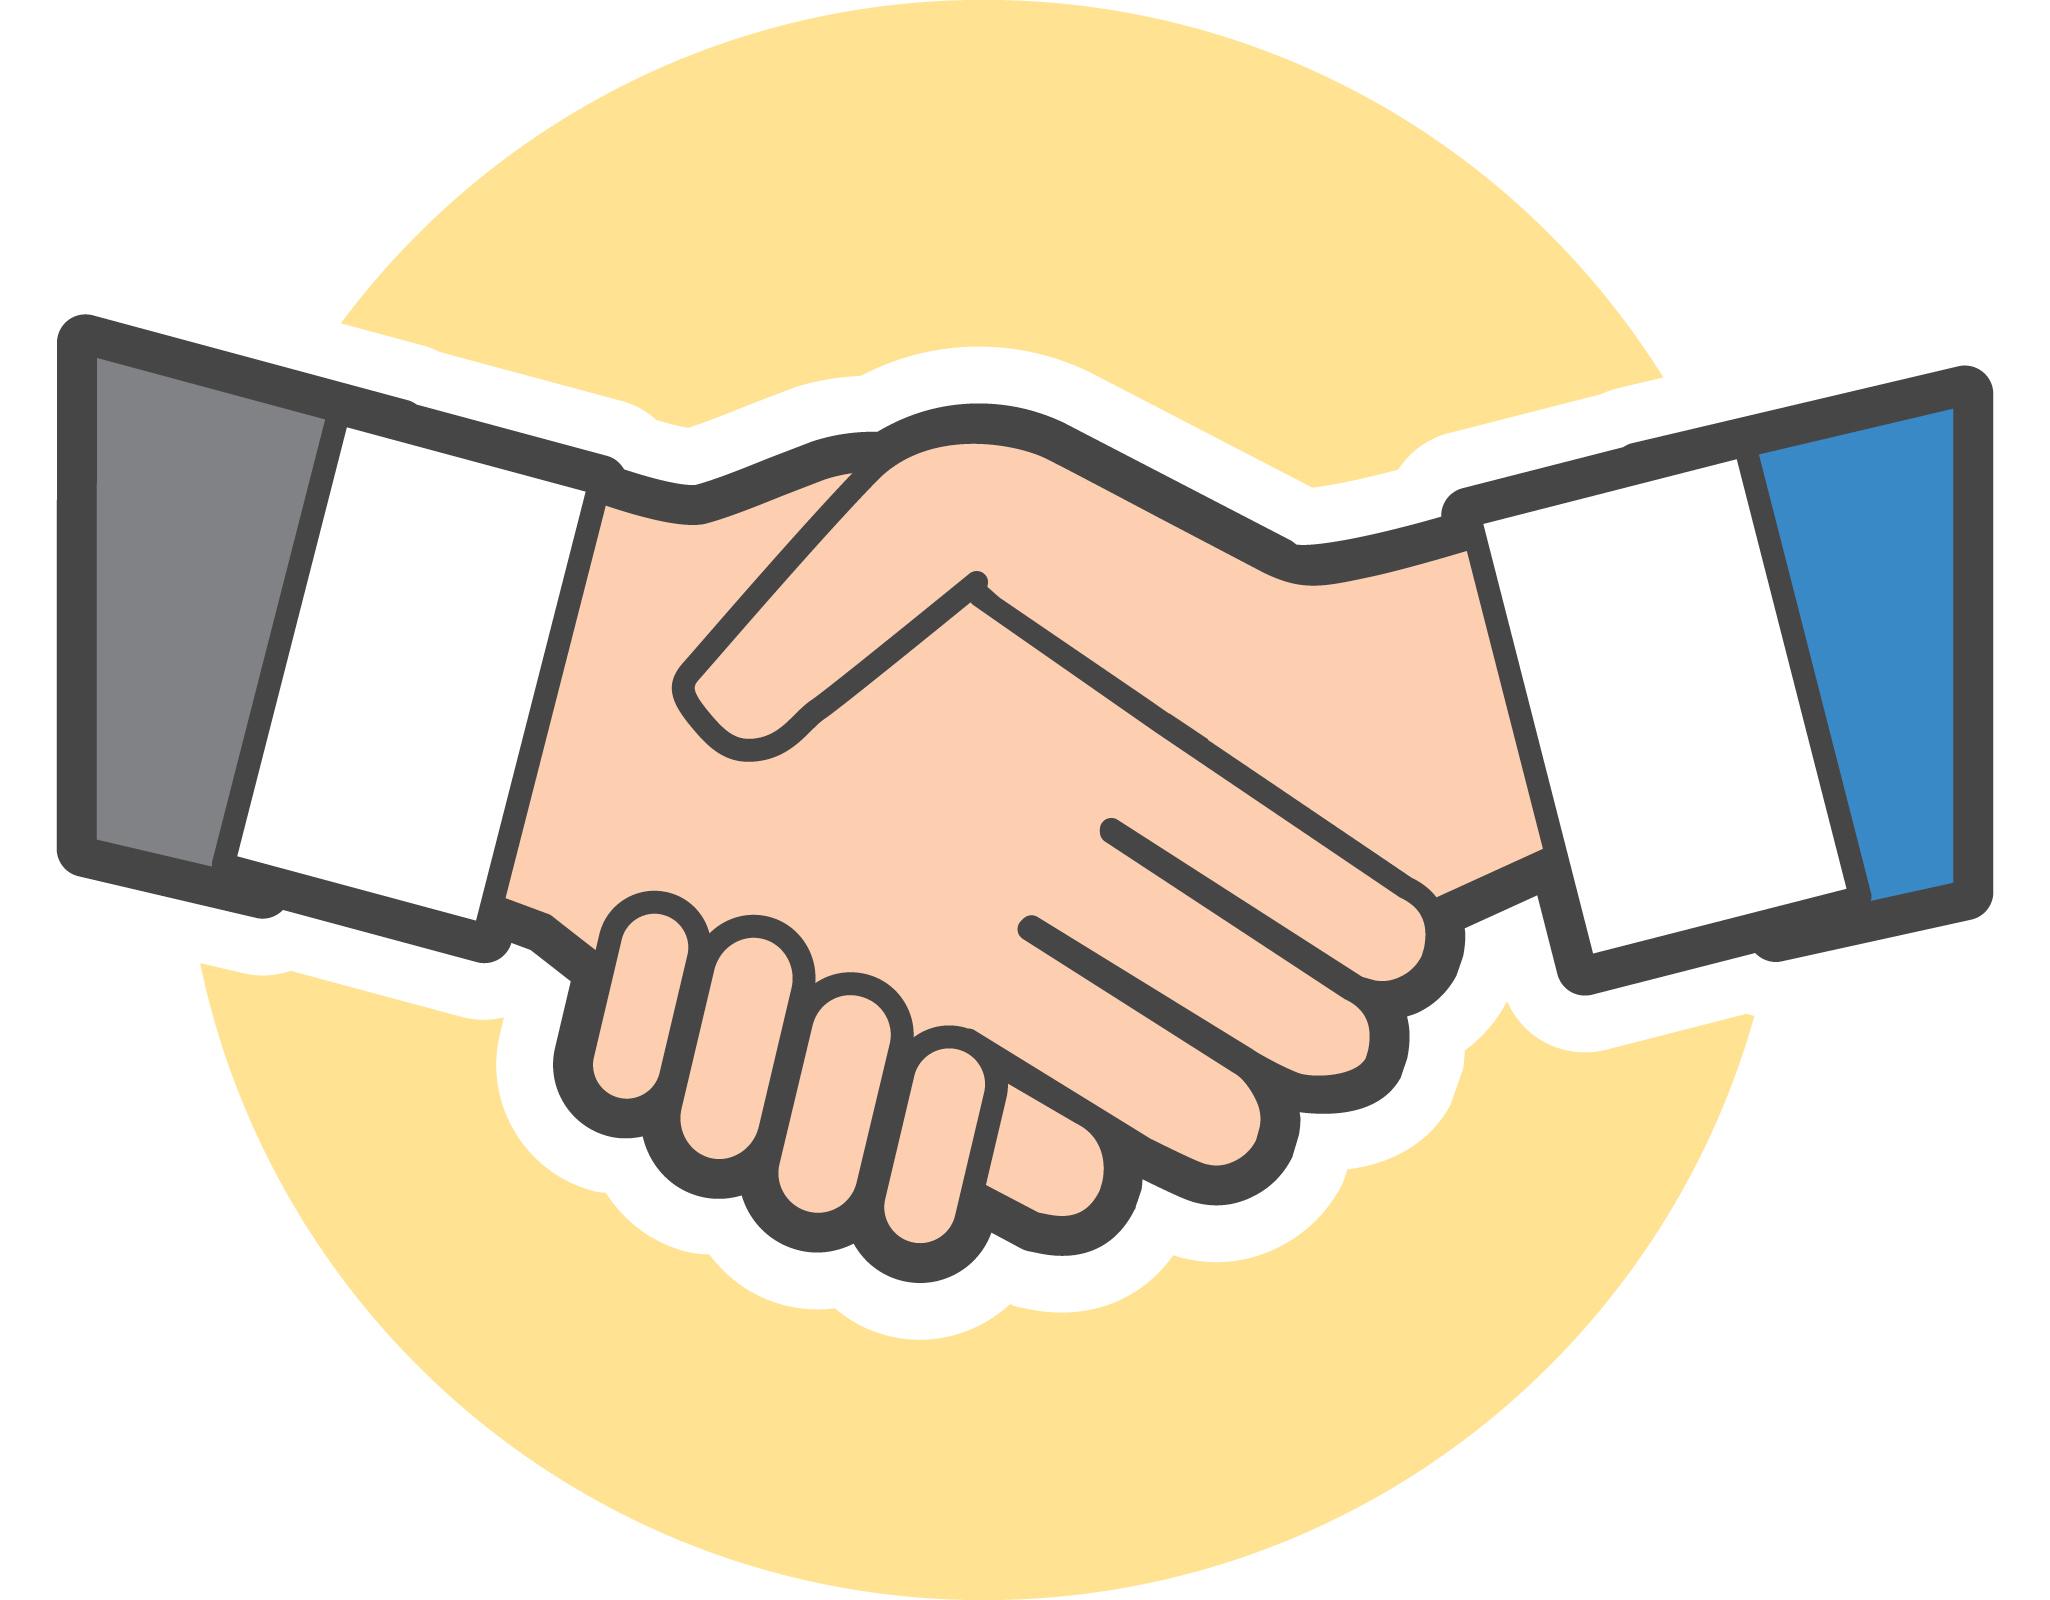 Handshake Clipart Group (+), HD Clipart.